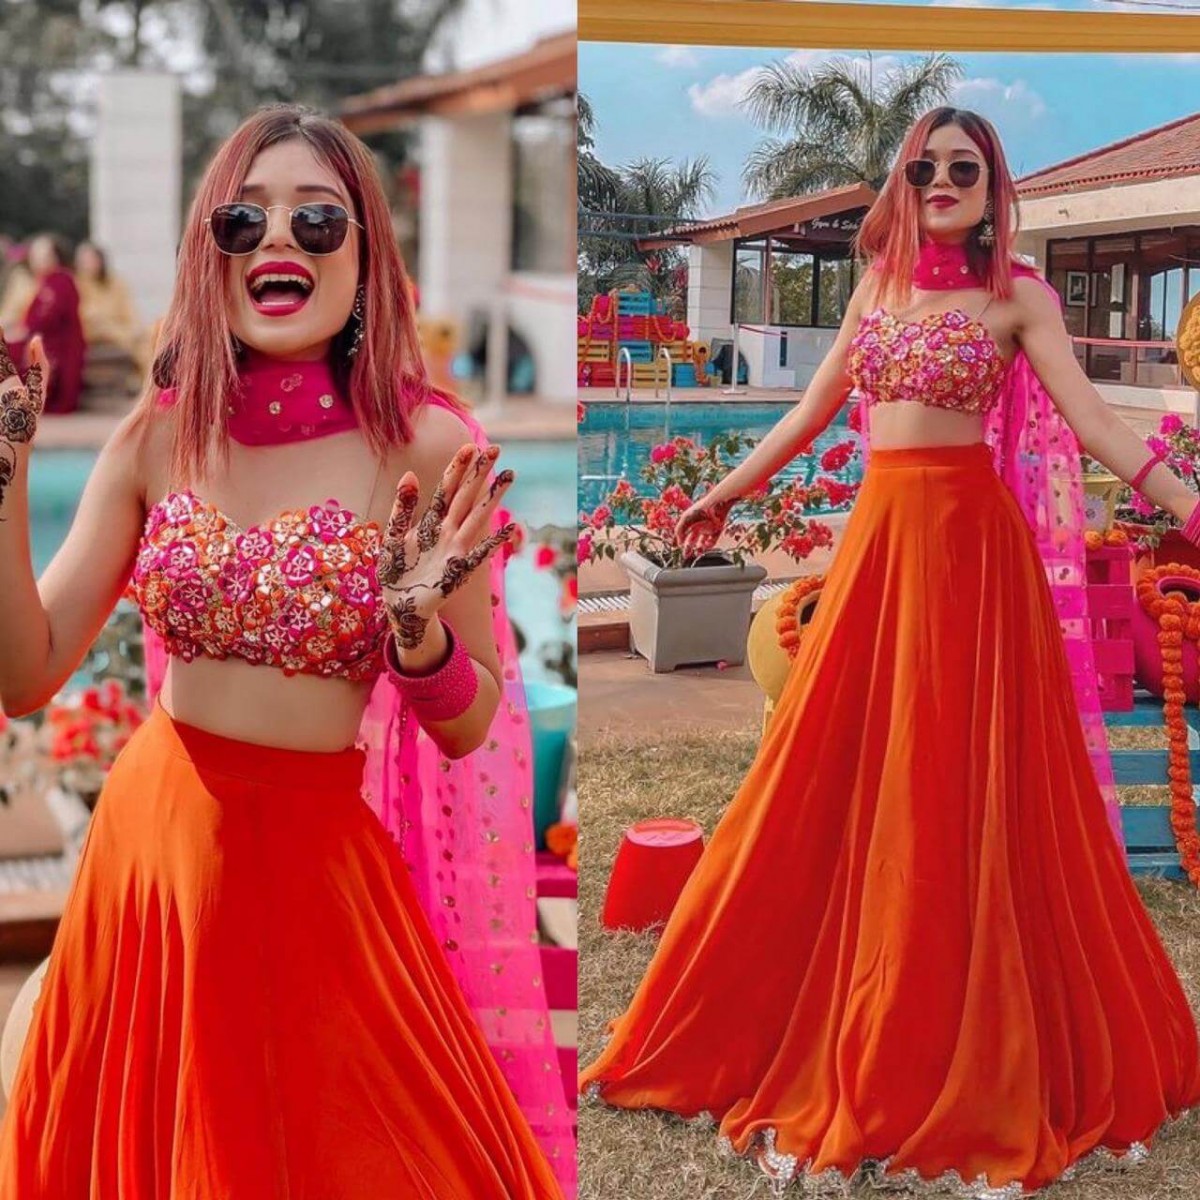 12 simple, lightweight lehengas that are perfect for intimate weddings |  Vogue India